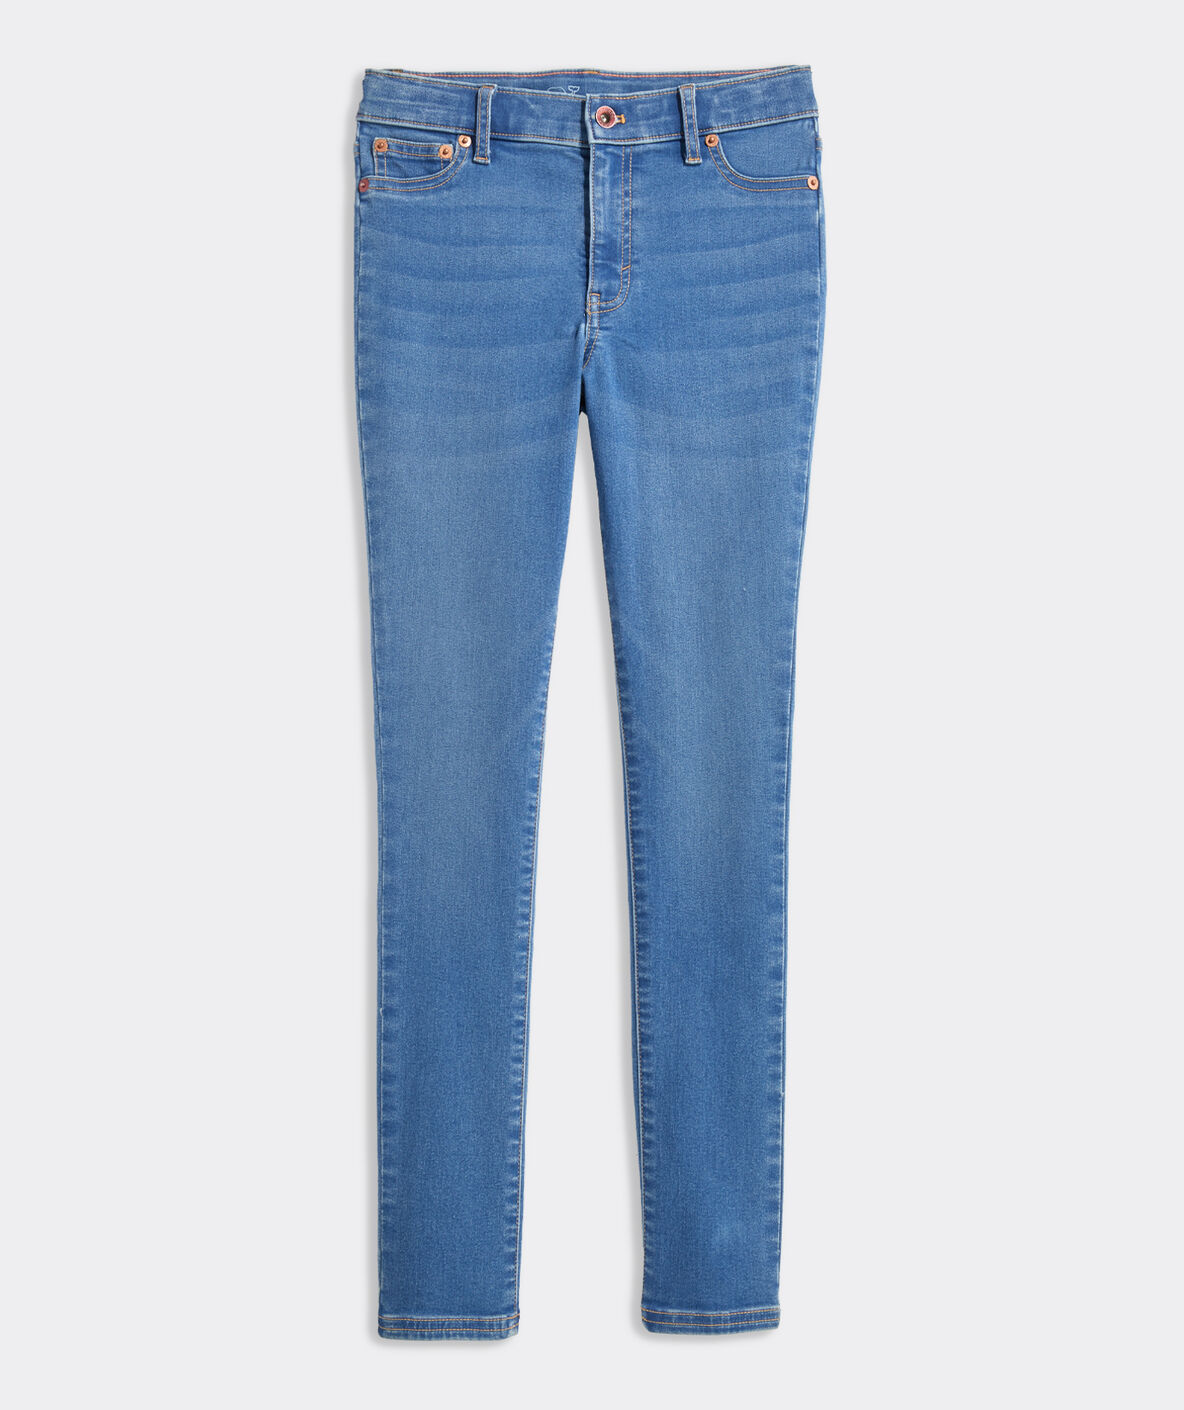 Buy Comfort Lady Women's Denim Jeans - Classic and Stylish Blue